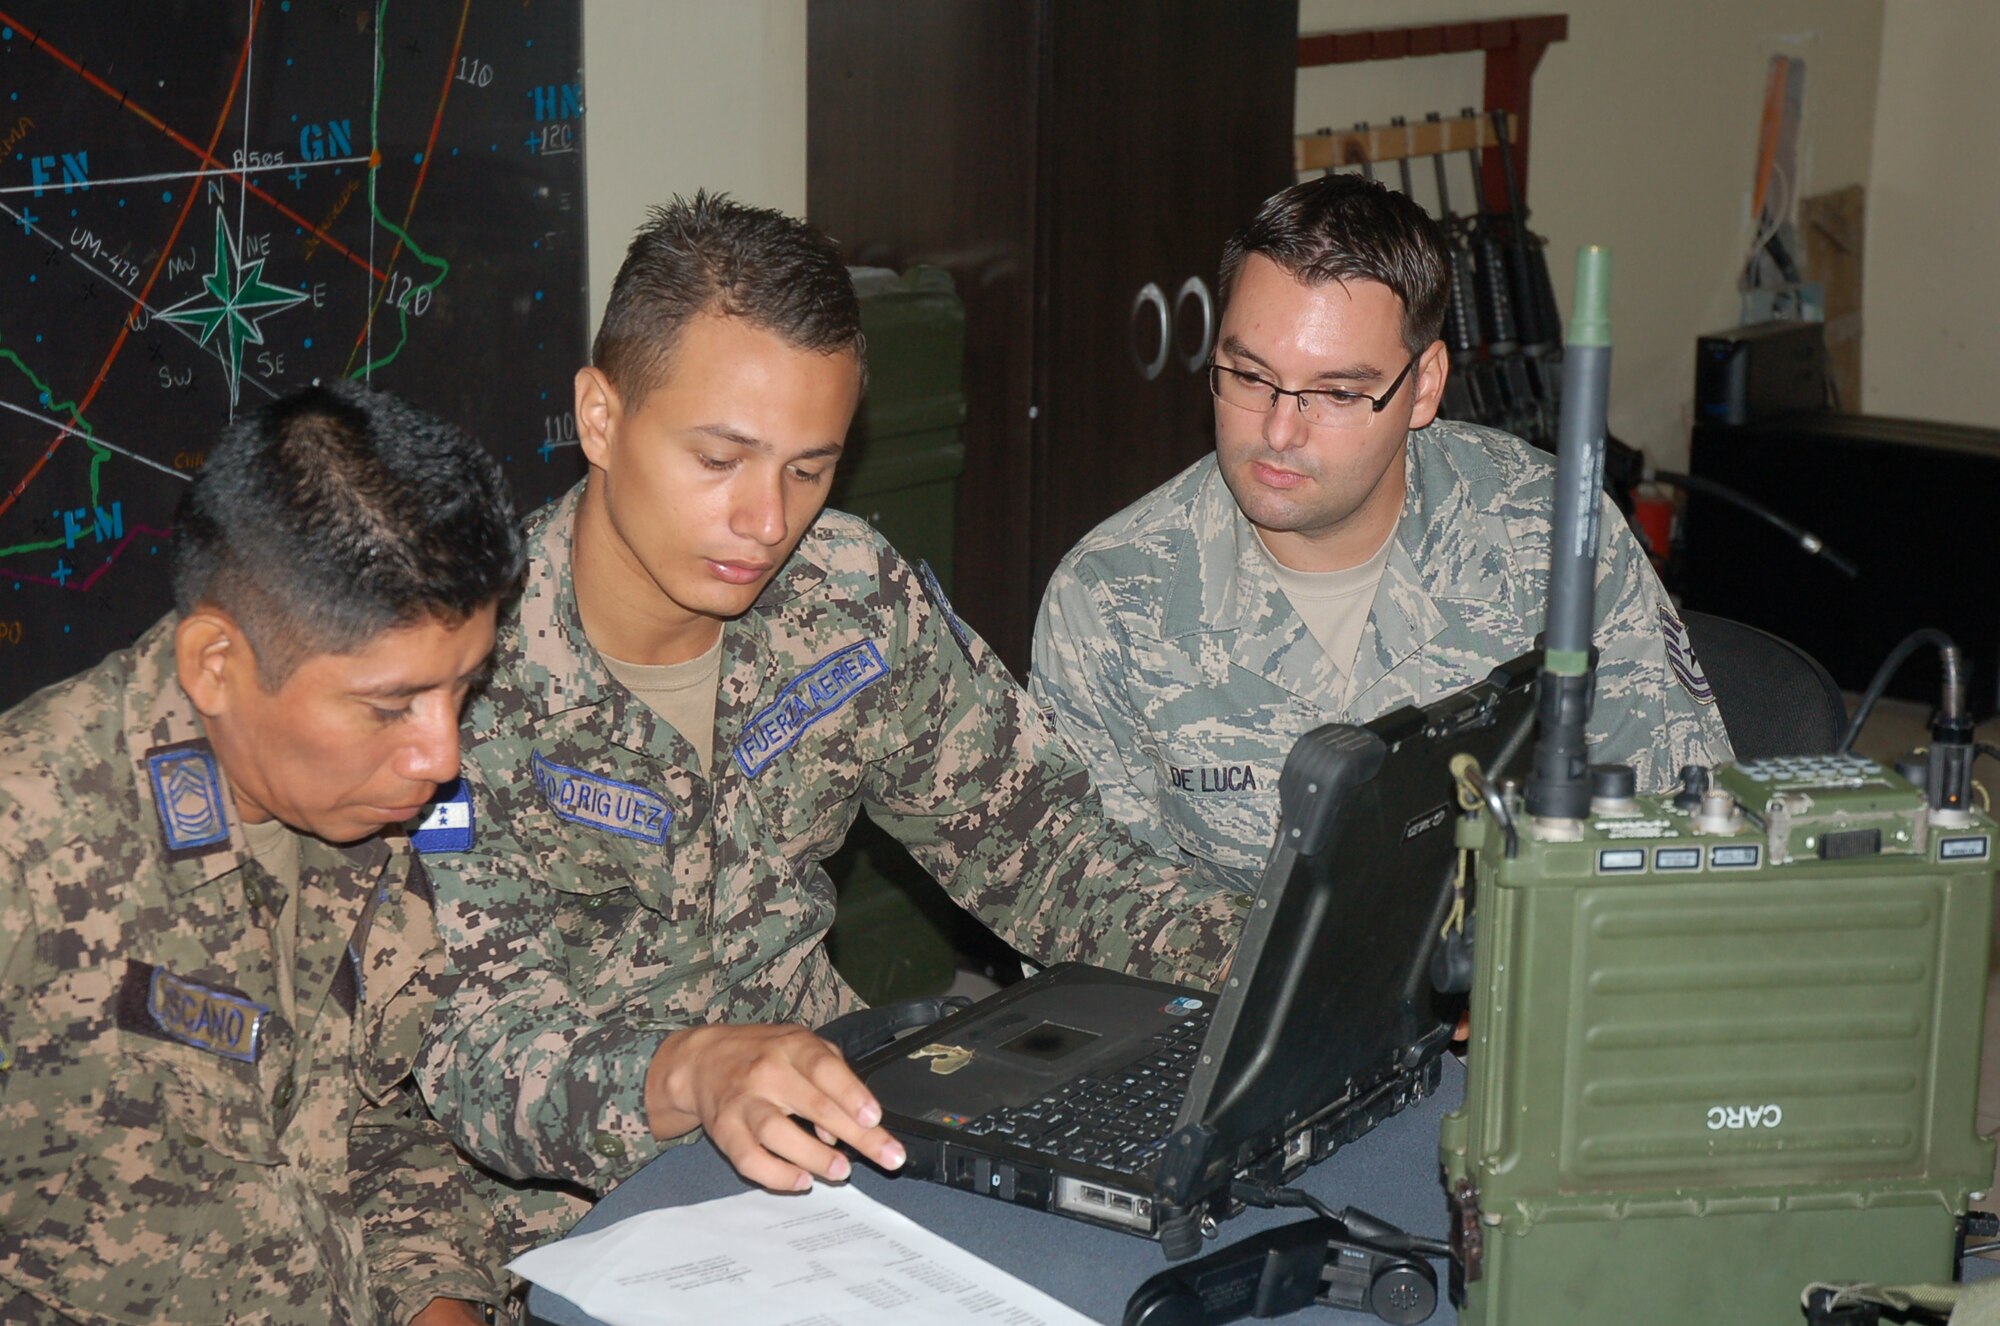 Tech. Sgt. Brian De Luca, 571st Mobility Support Advisory Squadron communications air advisor, observes the programming of a Harris RF-5800H-MP radio for secure communications between the Honduran Air Force and Navy during the MSAS building partner capacity engagement, 29 Jul – 24 Aug, at Base Aerea Hector Acosta Mejia, Tegucigalpa, Honduras. (U.S. Air Force photo by Tech. Sgt. Edgar Gonzalez)